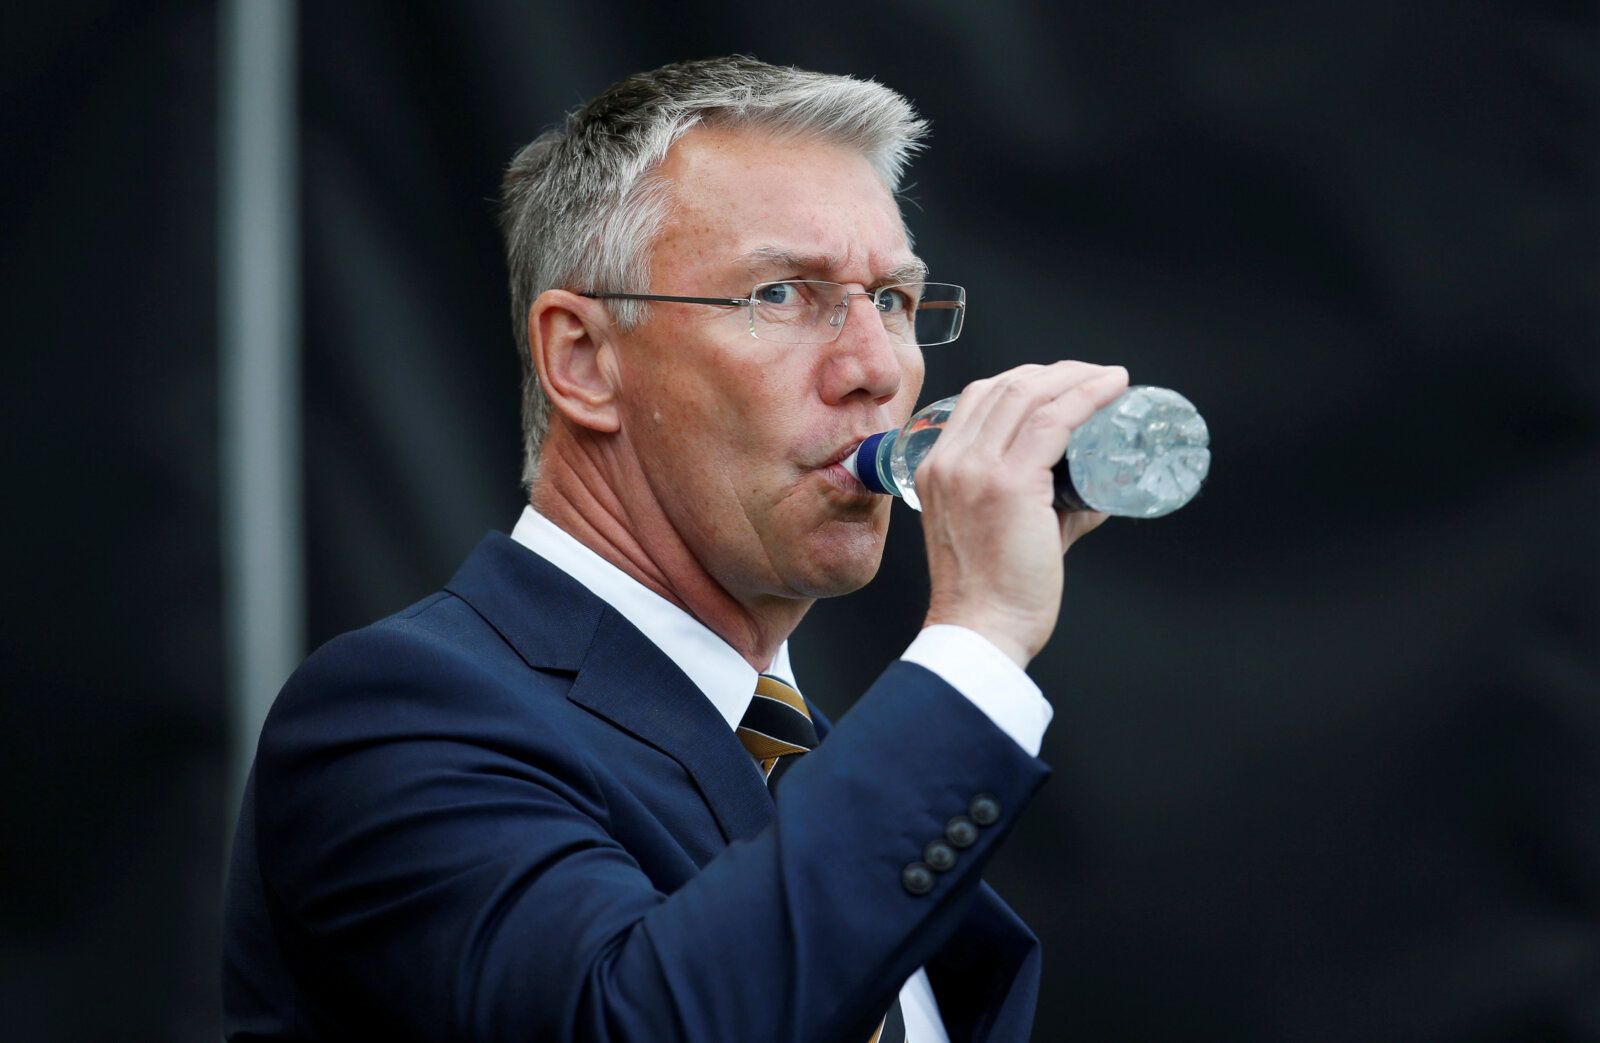 Soccer Football - Championship - Hull City v Sheffield United - KCOM Stadium, Hull, Britain - April 22, 2019  Hull City manager Nigel Adkins before the game  Action Images/Ed Sykes  EDITORIAL USE ONLY. No use with unauthorized audio, video, data, fixture lists, club/league logos or 